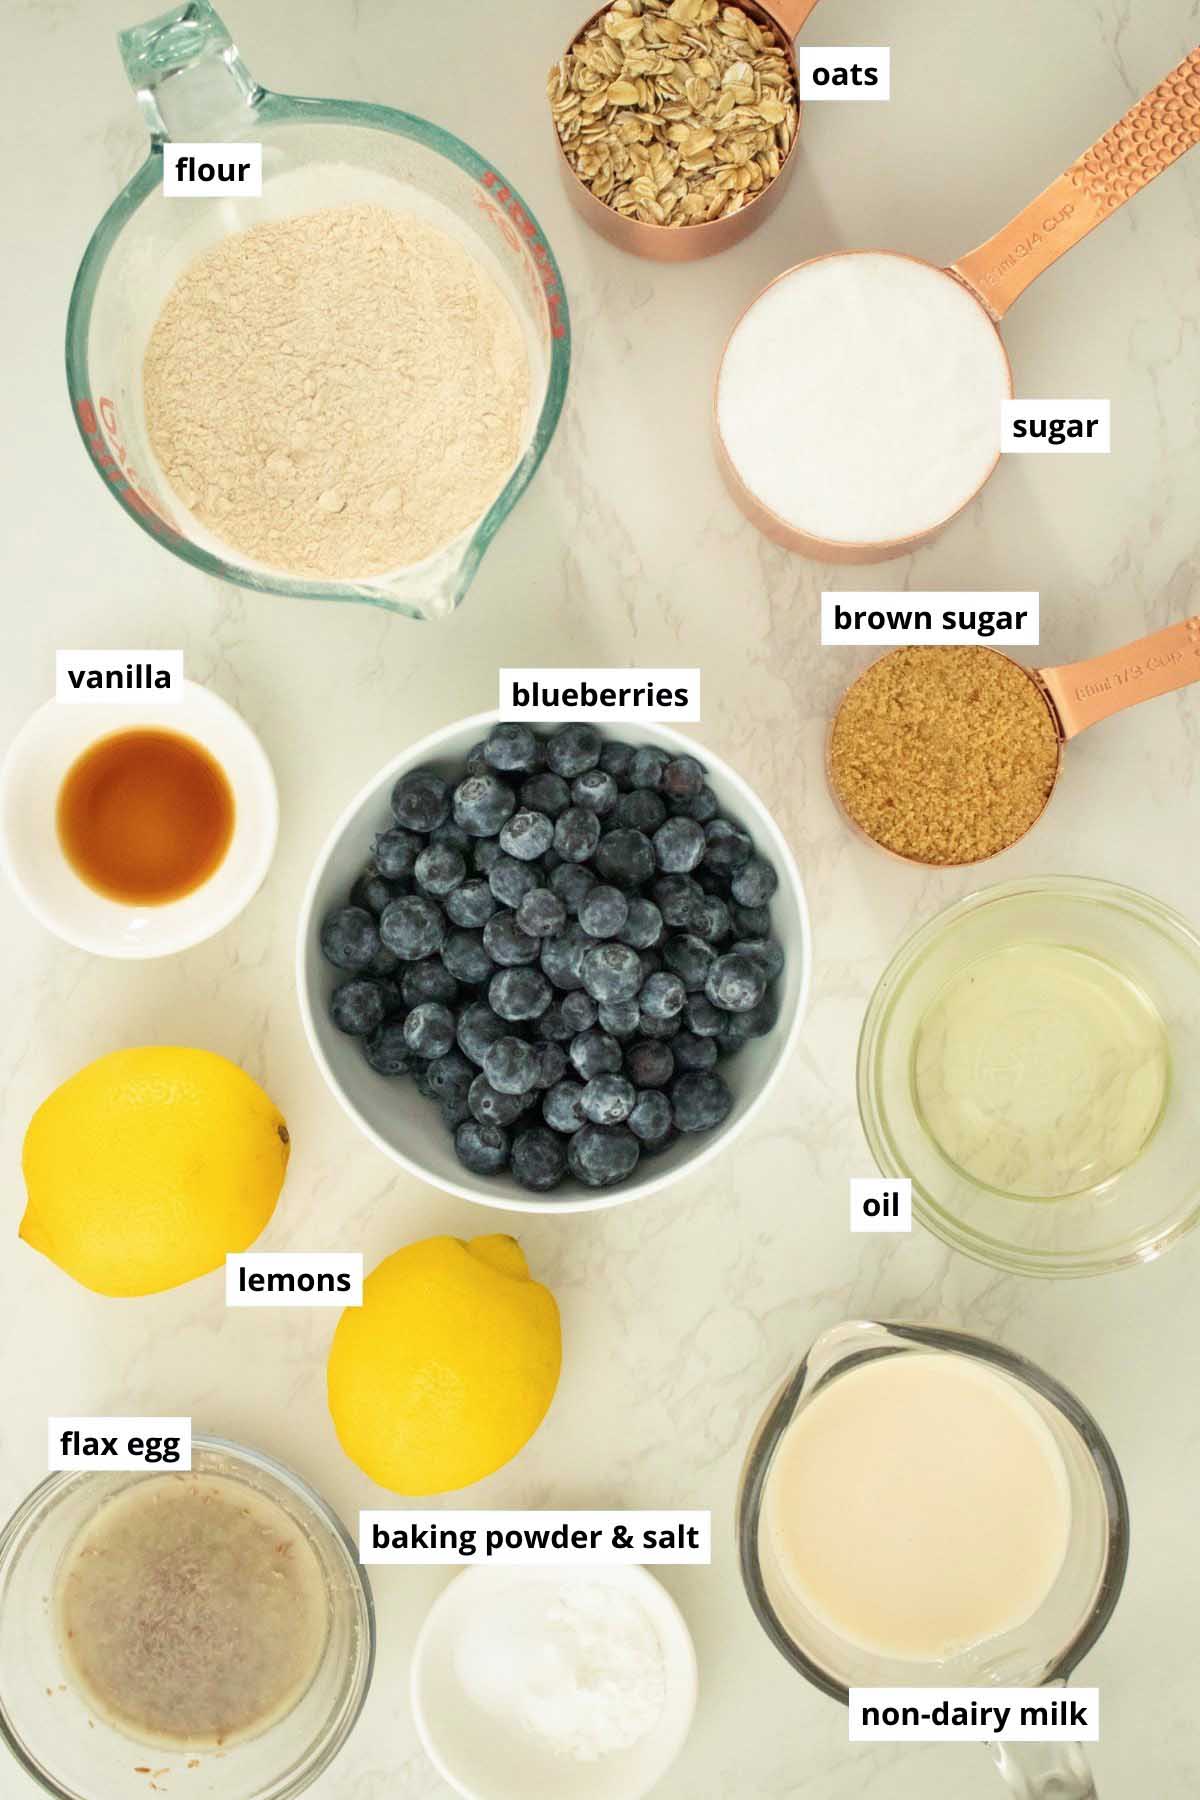 blueberries, lemons, flour, and other muffin ingredients in bowls on a white table